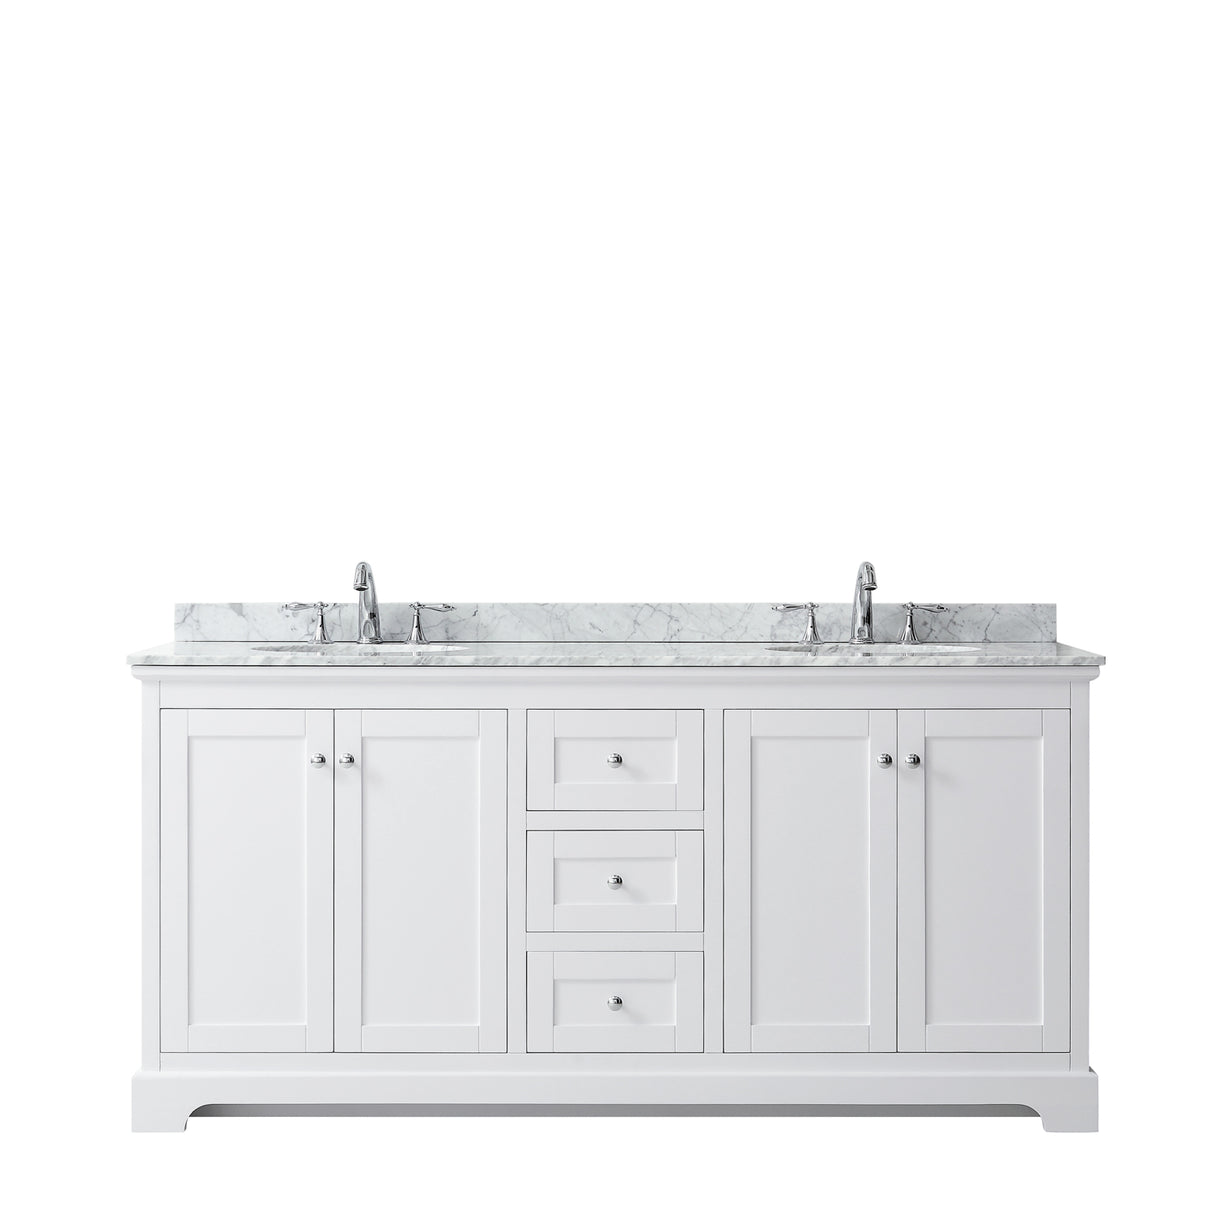 Avery 72 Inch Double Bathroom Vanity in White White Carrara Marble Countertop Undermount Oval Sinks and No Mirror